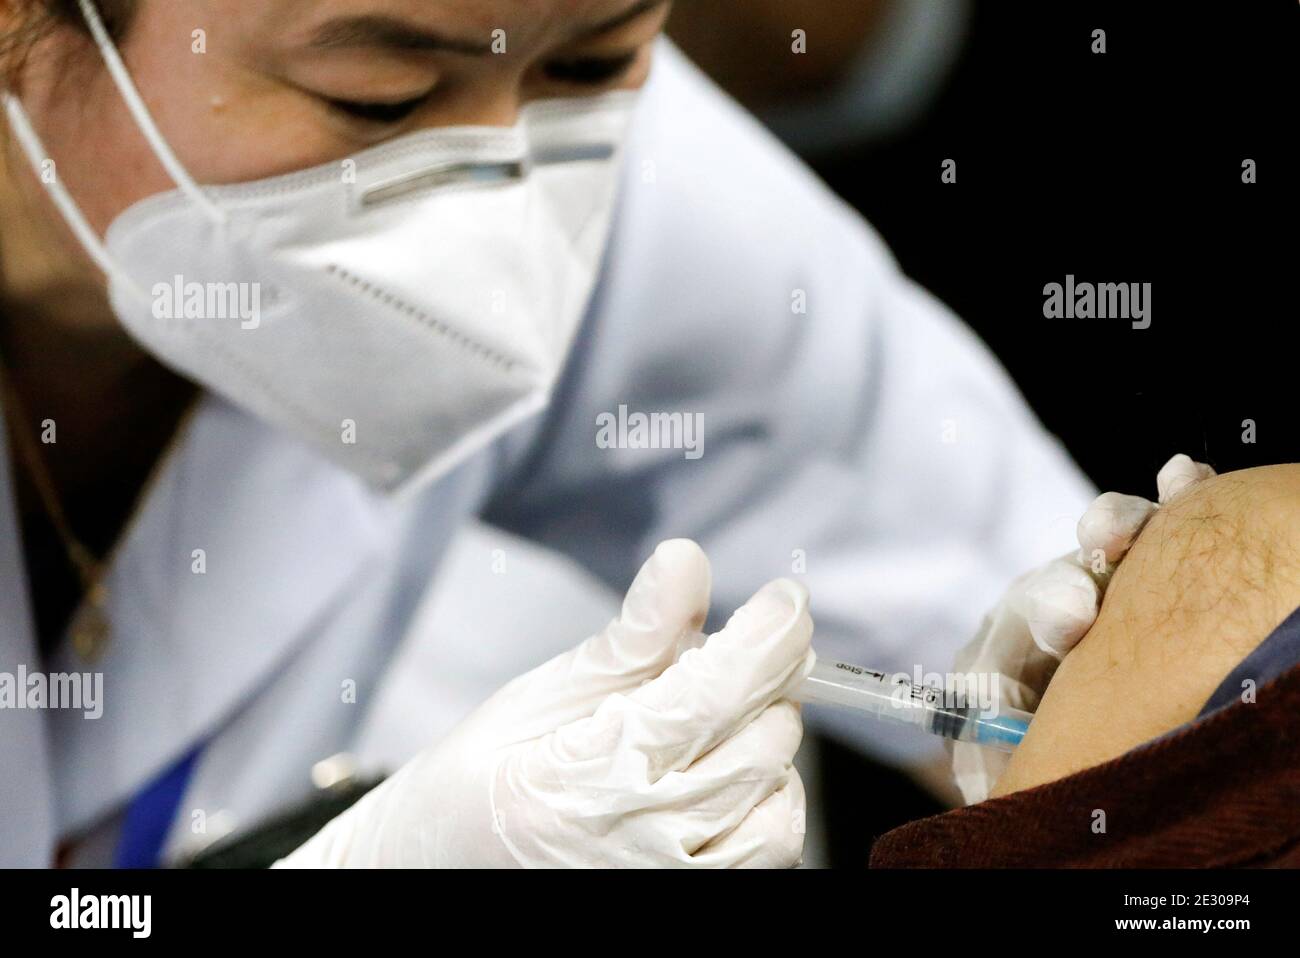 A healthcare worker receives a Bharat Biotech's COVID-19 vaccine called COVAXIN, during the coronavirus disease (COVID-19) vaccination campaign at All India Institute of Medical Sciences (AIIMS) hospital in New Delhi, India, January 16, 2021. REUTERS/Adnan Abidi Stock Photo